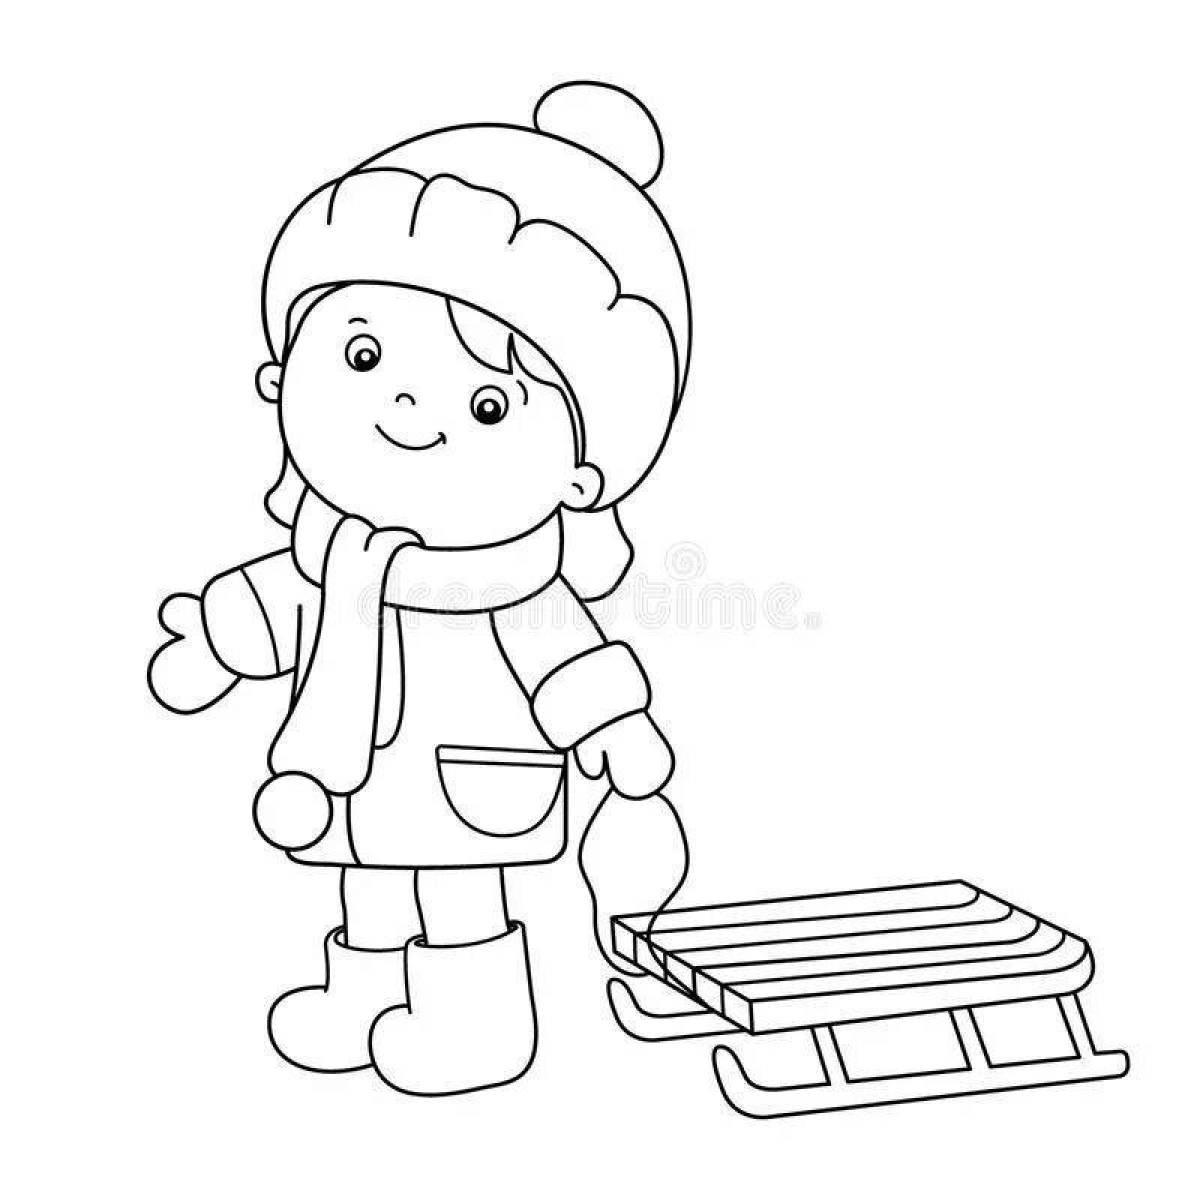 Awesome winter clothes coloring page for 3-4 year olds